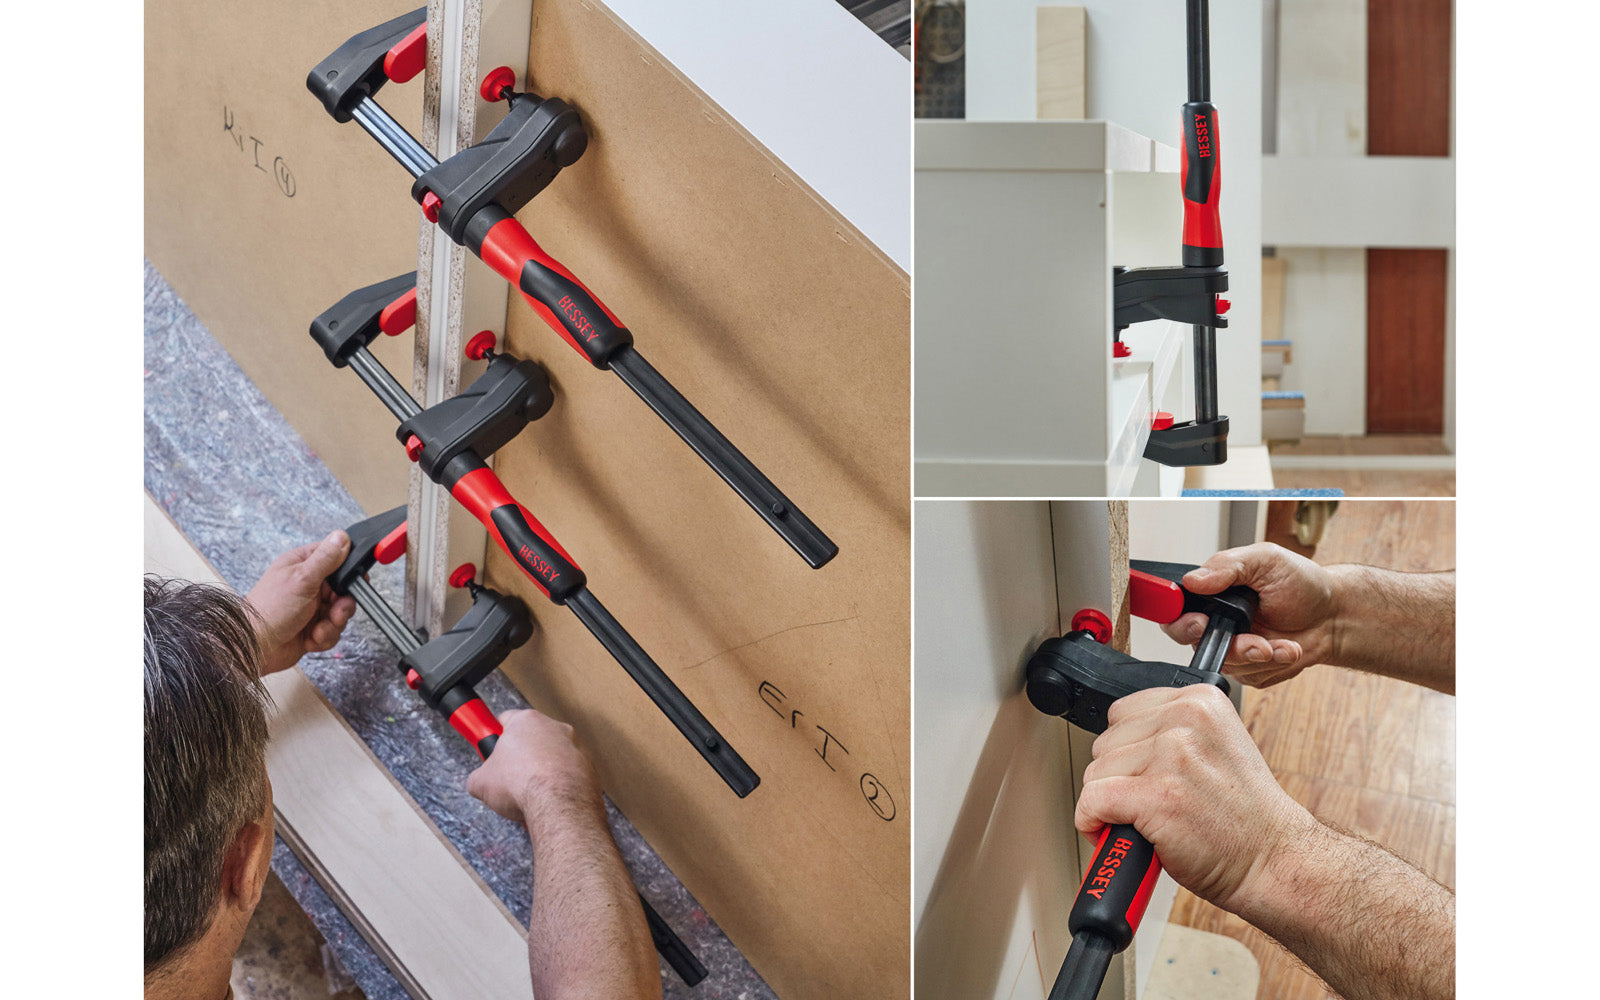 Bessey GearKlamp reaches difficult or impossible to access. Patented mechanism separates spindle from handle for greater clearance. The unique mechanism allows the handle to be offset from the point of contact. This creates the possibility of reaching "into” confined spaces to achieve clamping solutions - Model GK15 - 6" Opening Capacity 